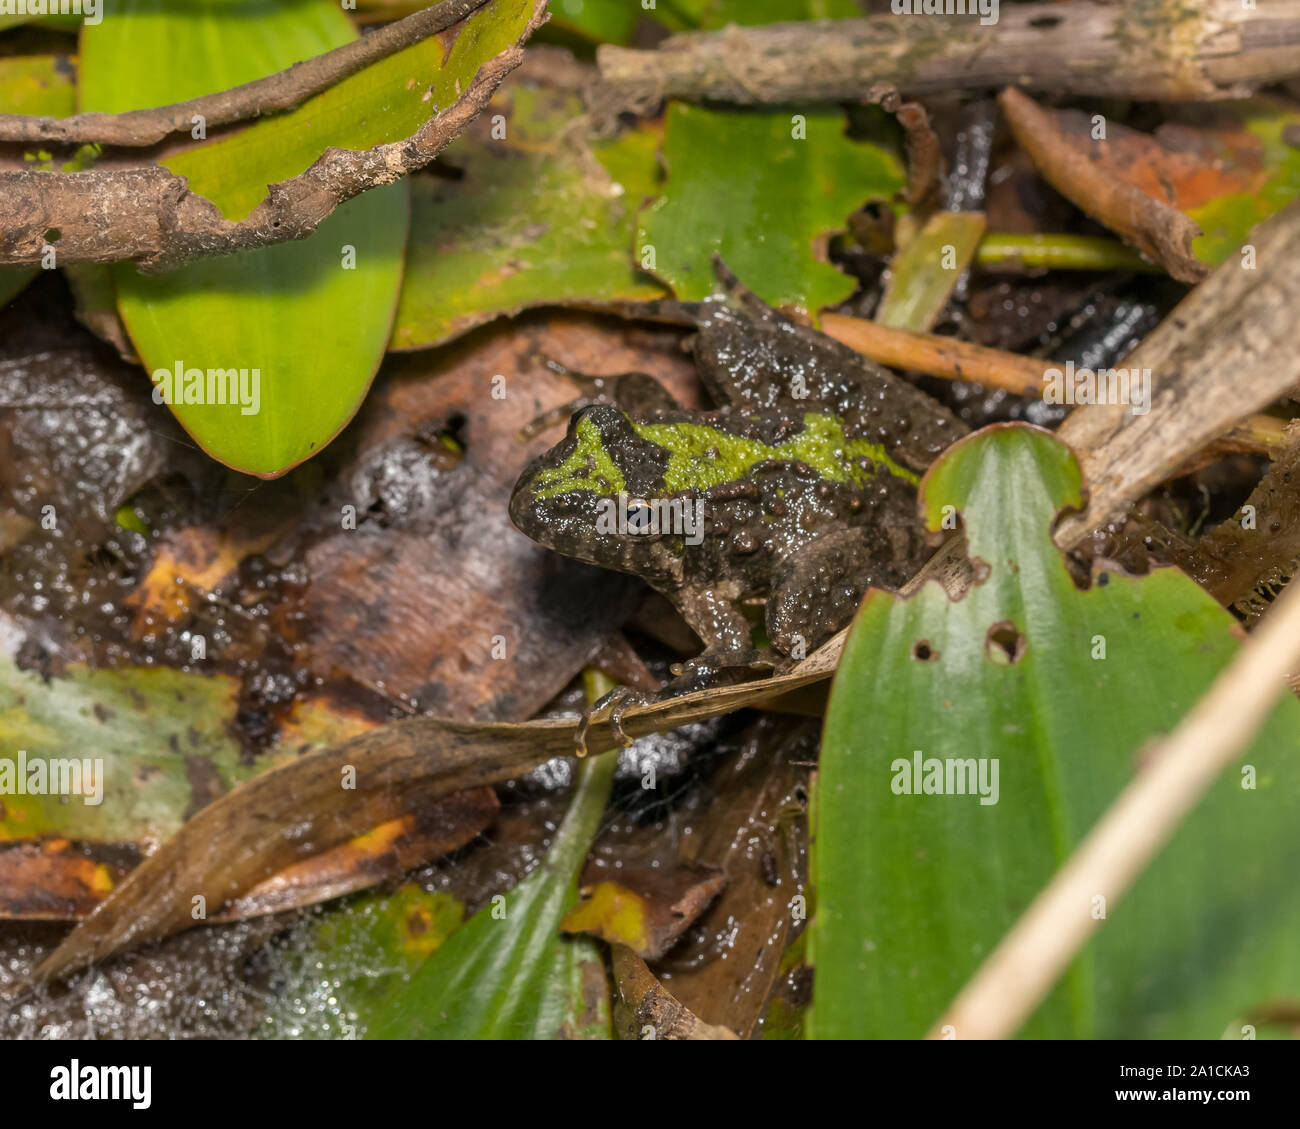 Blanchard's cricket frog, tree frog species, in its natural environment of vegetation on the shore line of a pond. Stock Photo